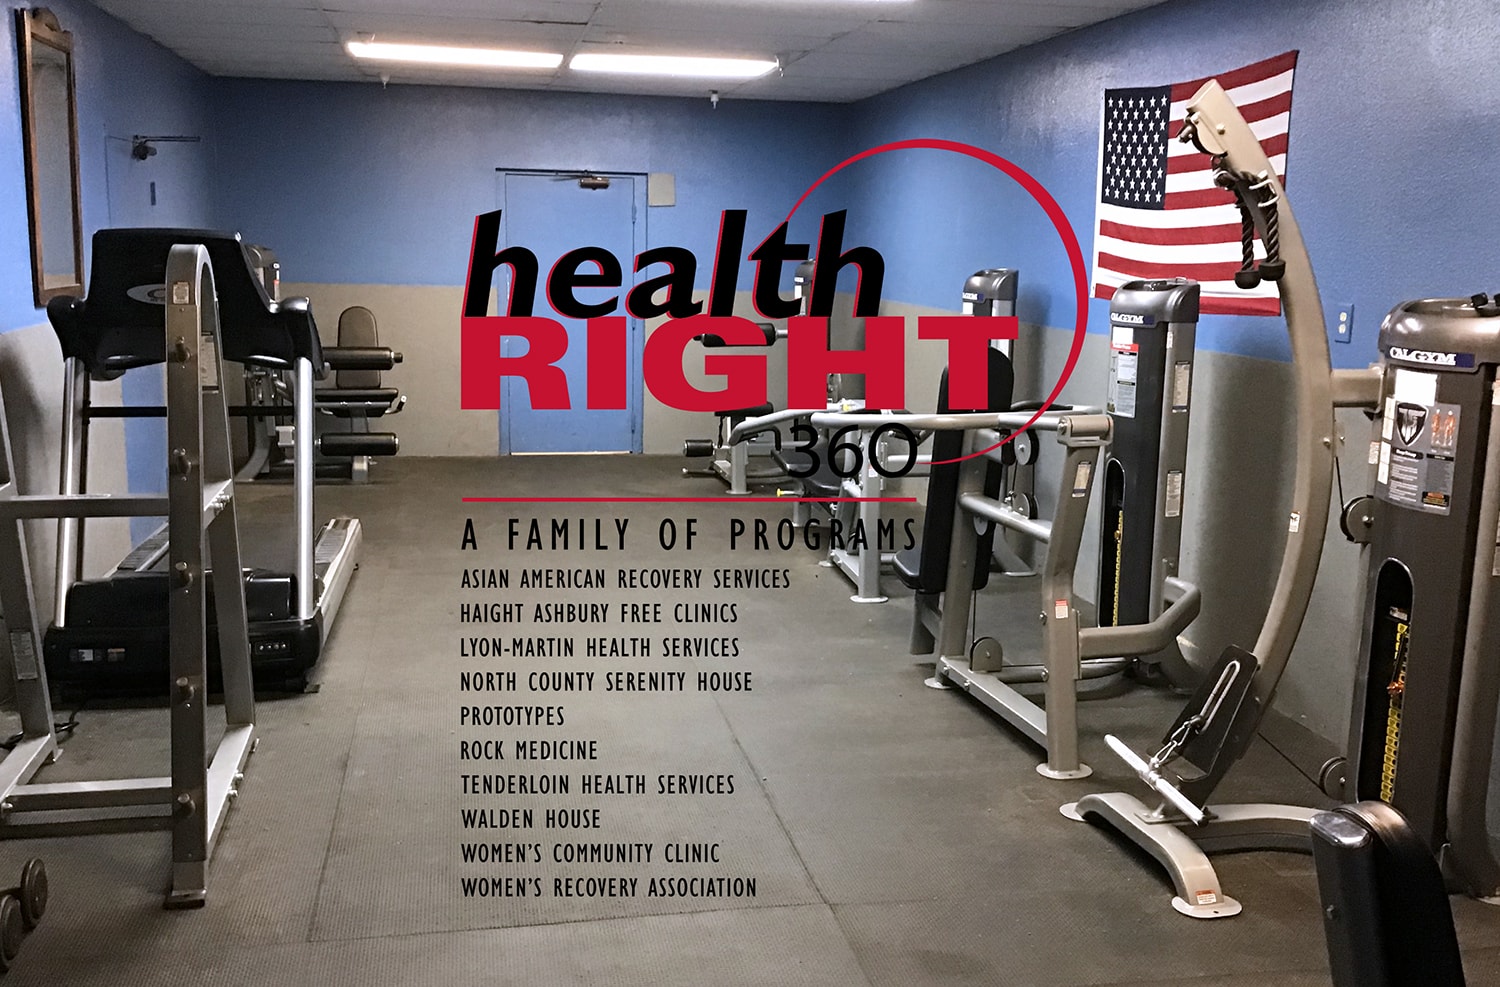 TuffStuff Fitness CalGym Equipment Donation to HealthRIGHT 360